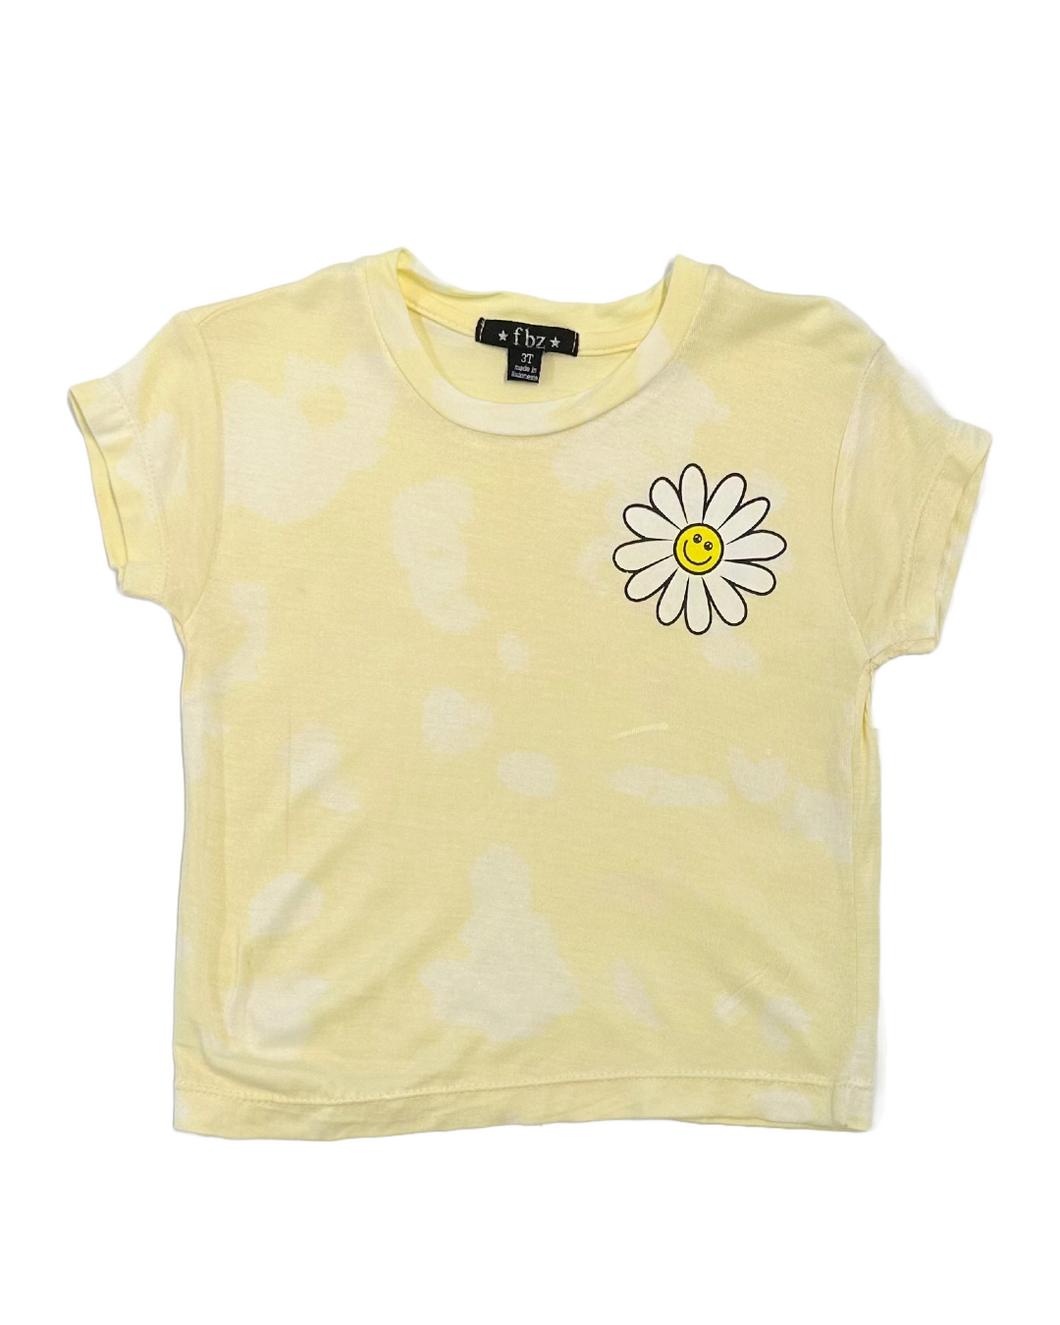 Smiley Face Flower Tee